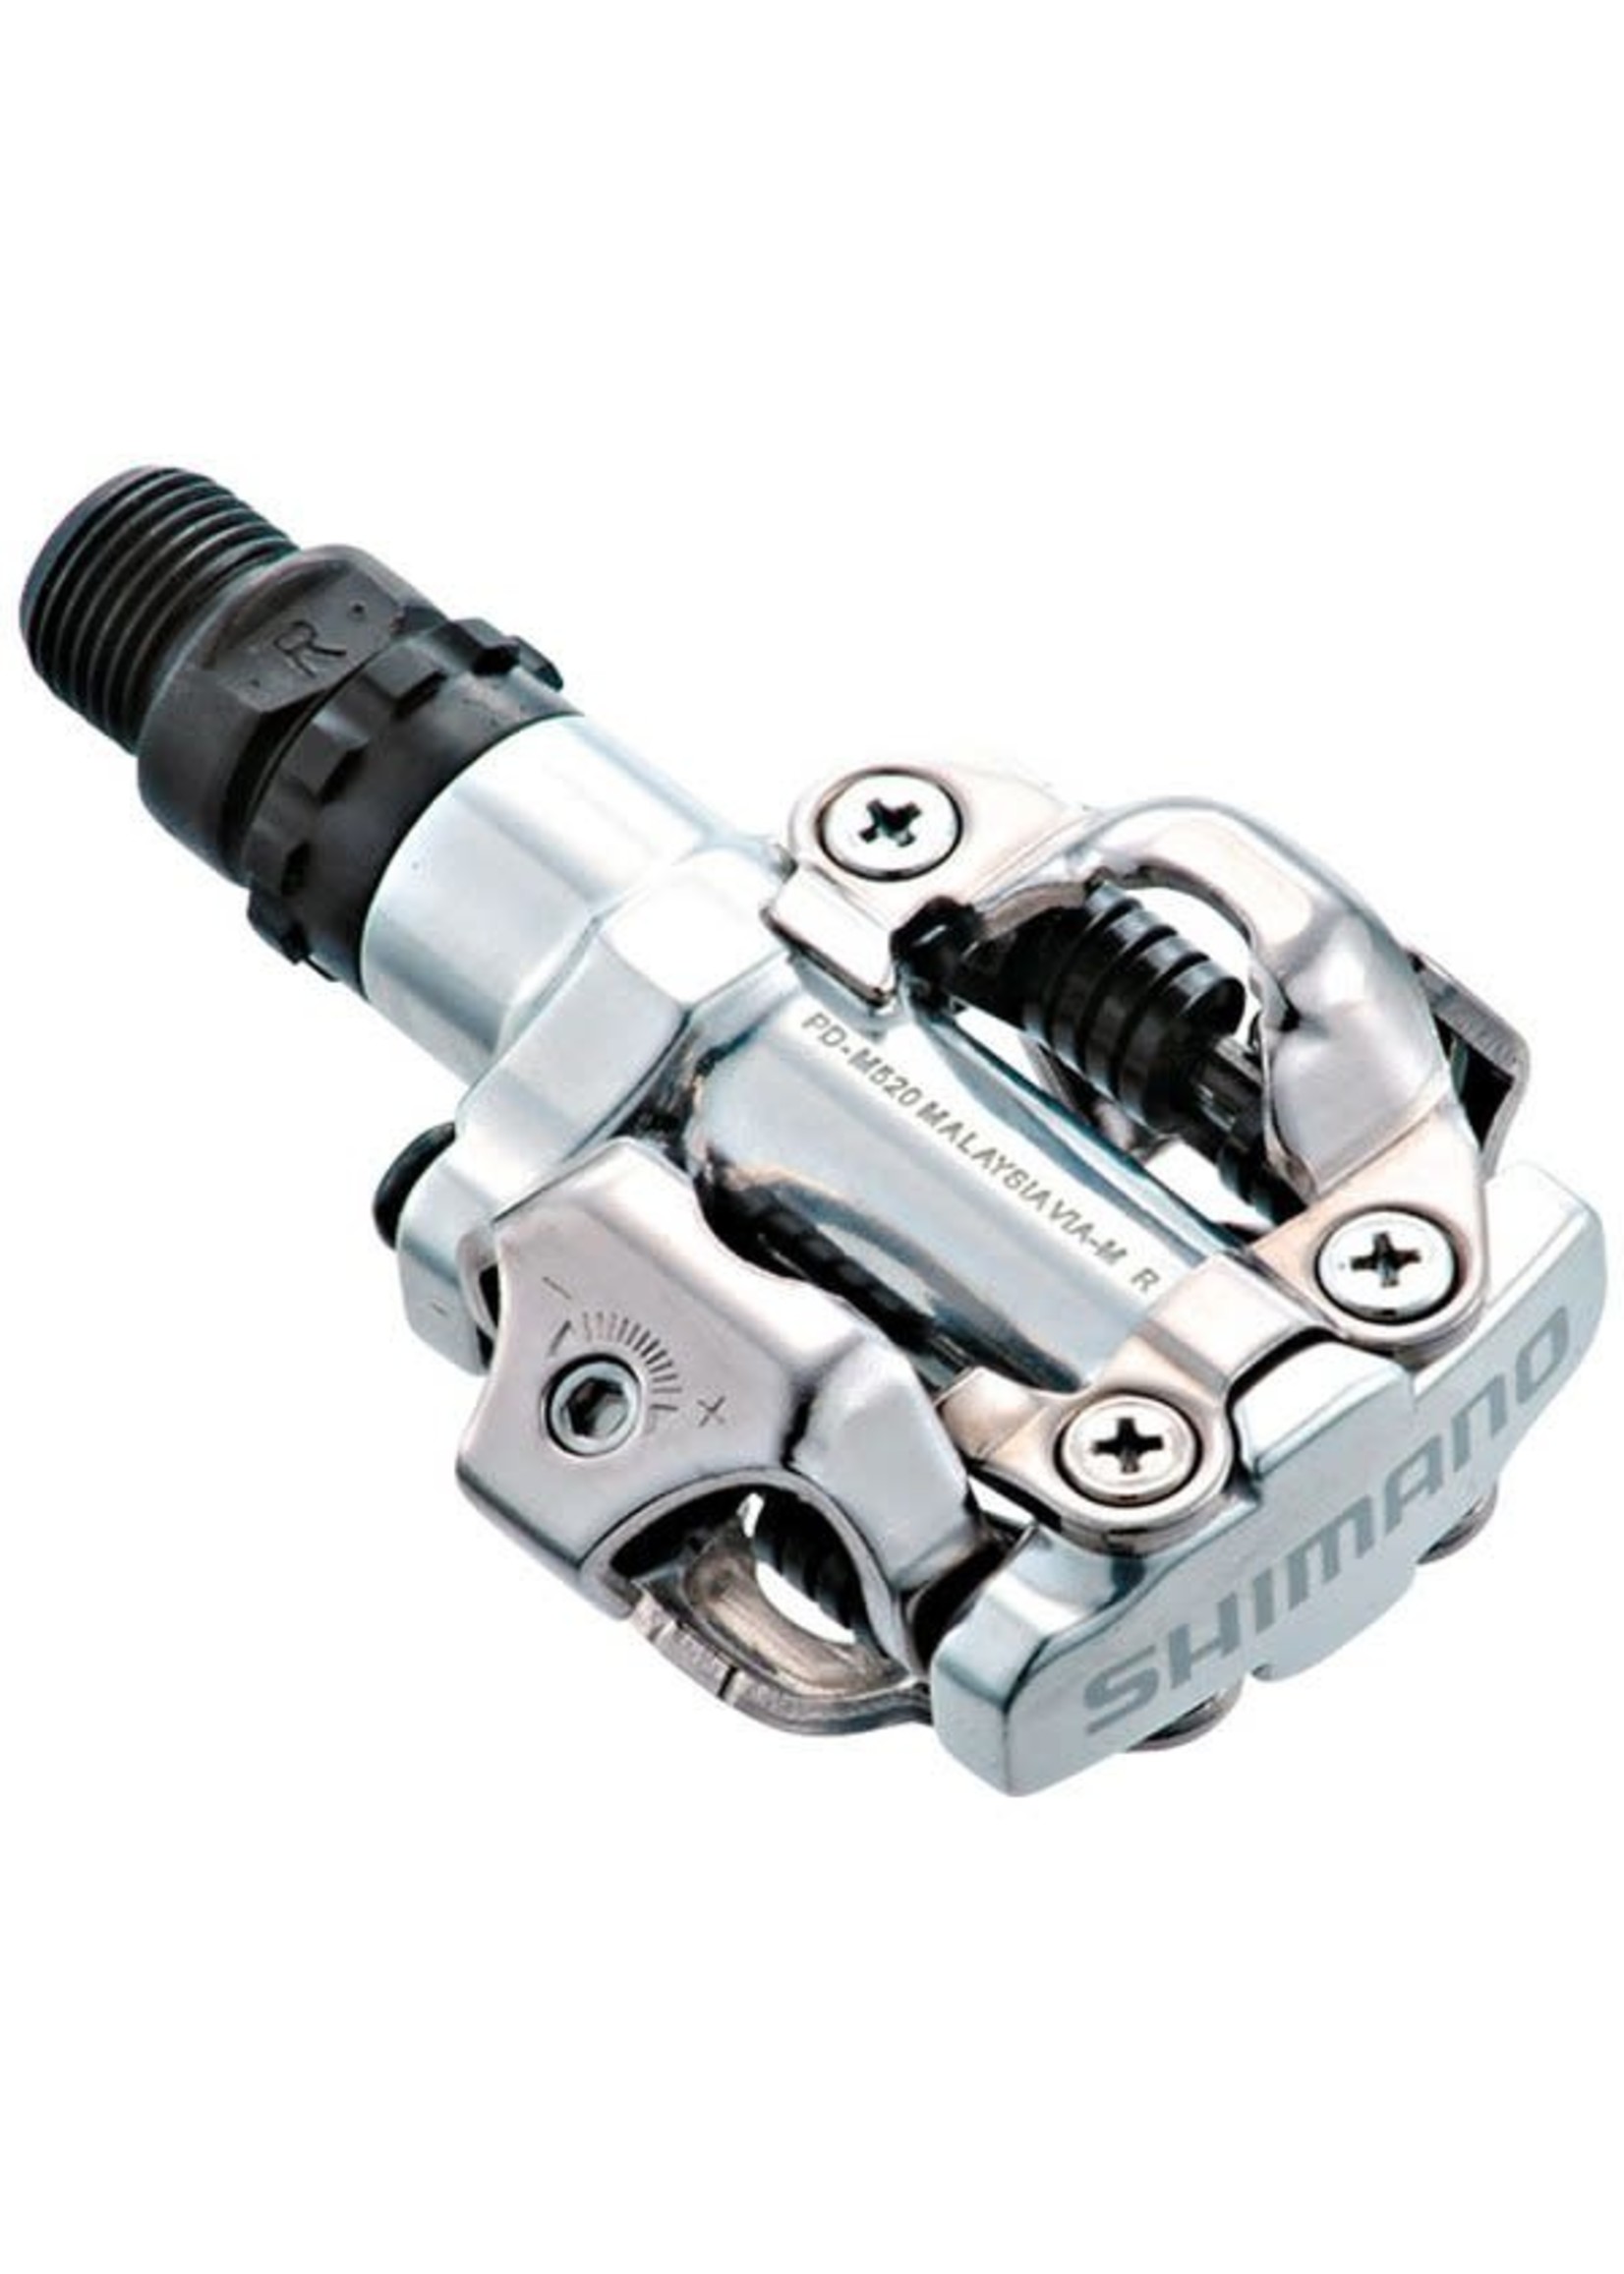 Shimano Shimano PD-M520 MTB SPD pedals - two sided mechanism, silver